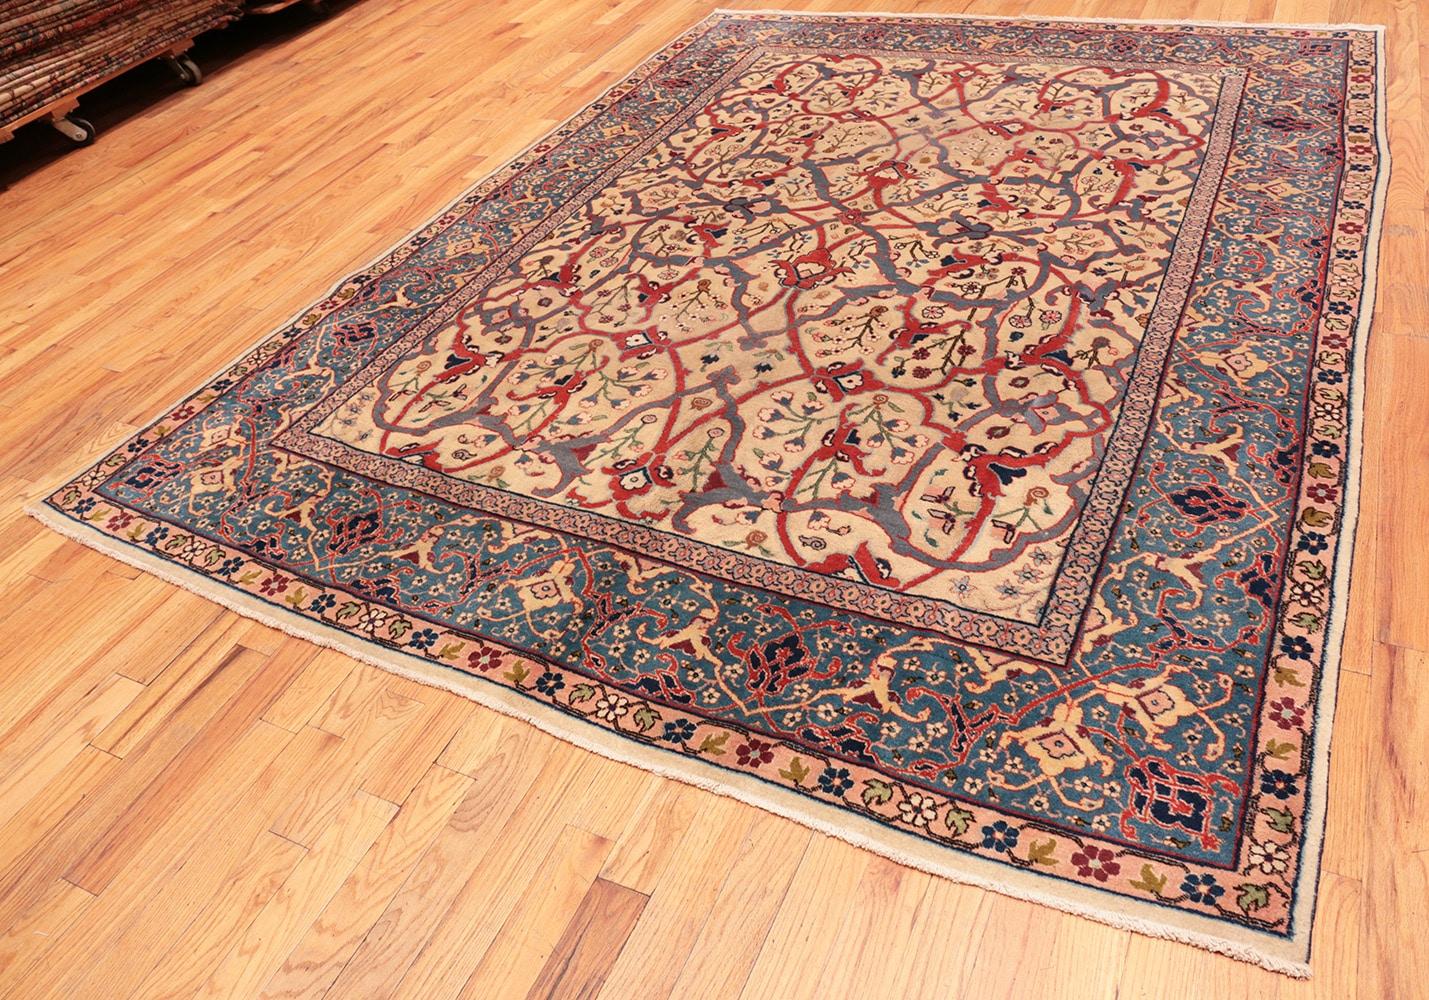 20th Century Nazmiyal Collection Antique Persian Tabriz Rug. Size: 7 ft 10 in x 10 ft 2 in 